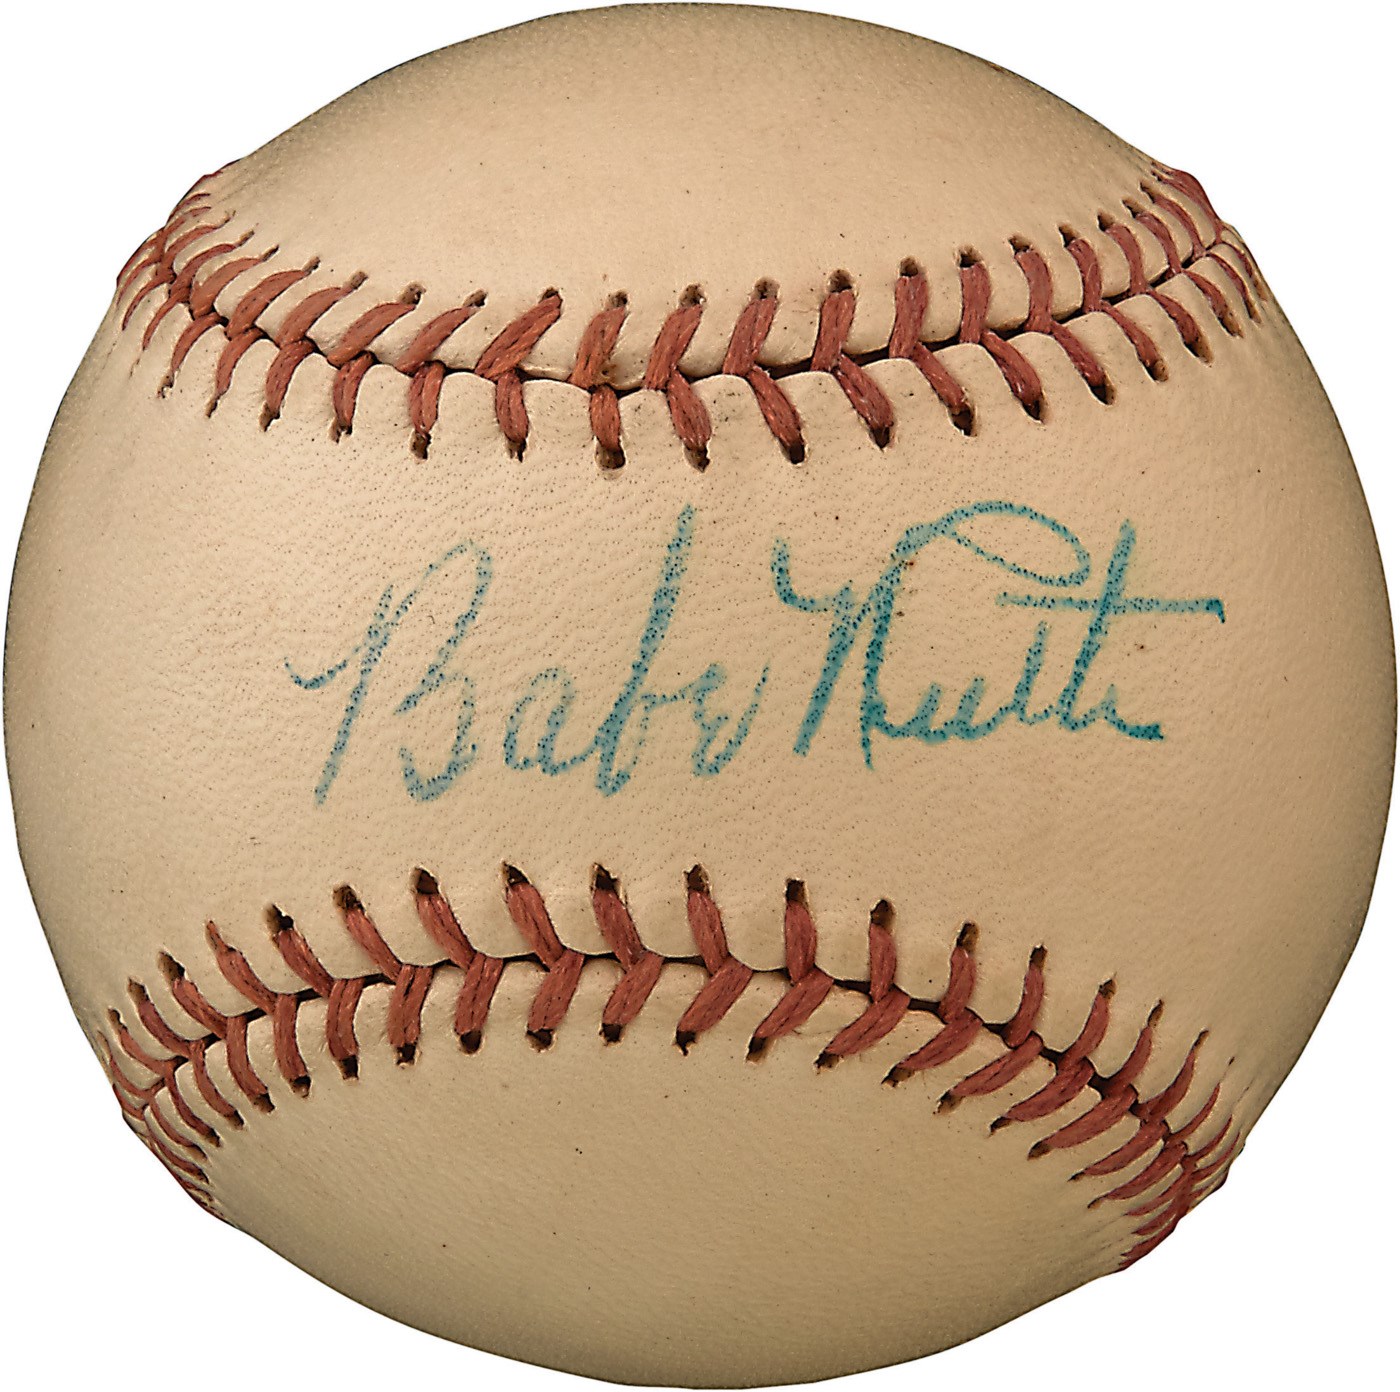 Babe Ruth and Lou Gehrig - 1945-48 Babe Ruth Single-Signed Baseball Originally from Charlie Sheen (PSA/DNA NM 7)